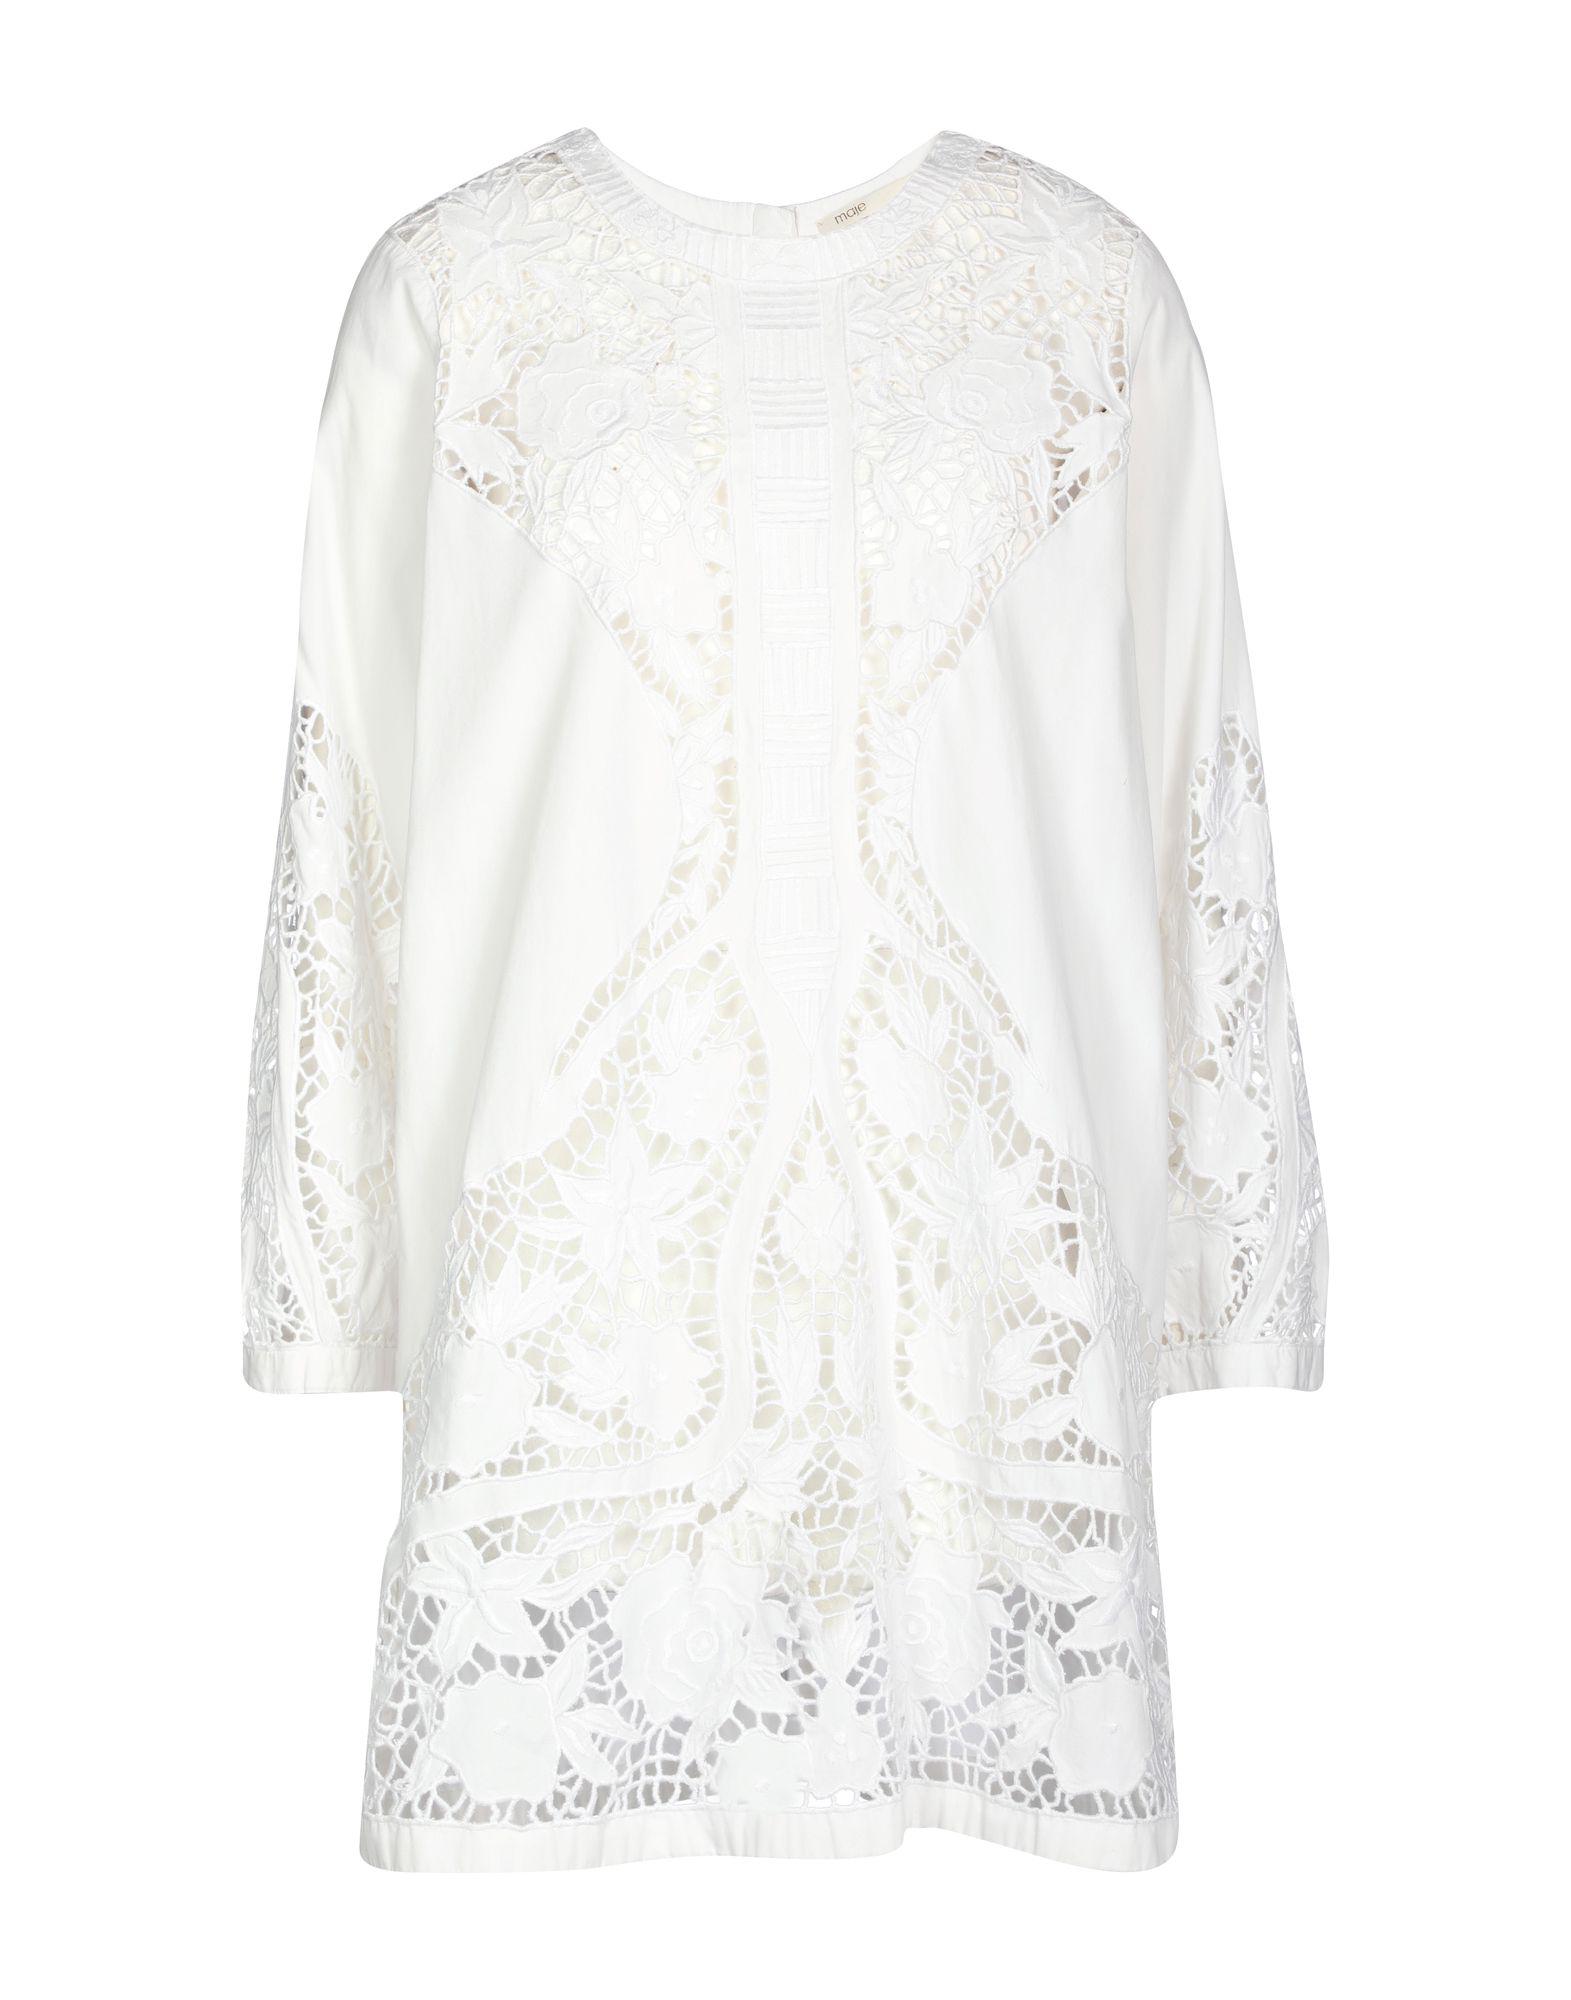 Maje Lace Short Dress in White - Lyst